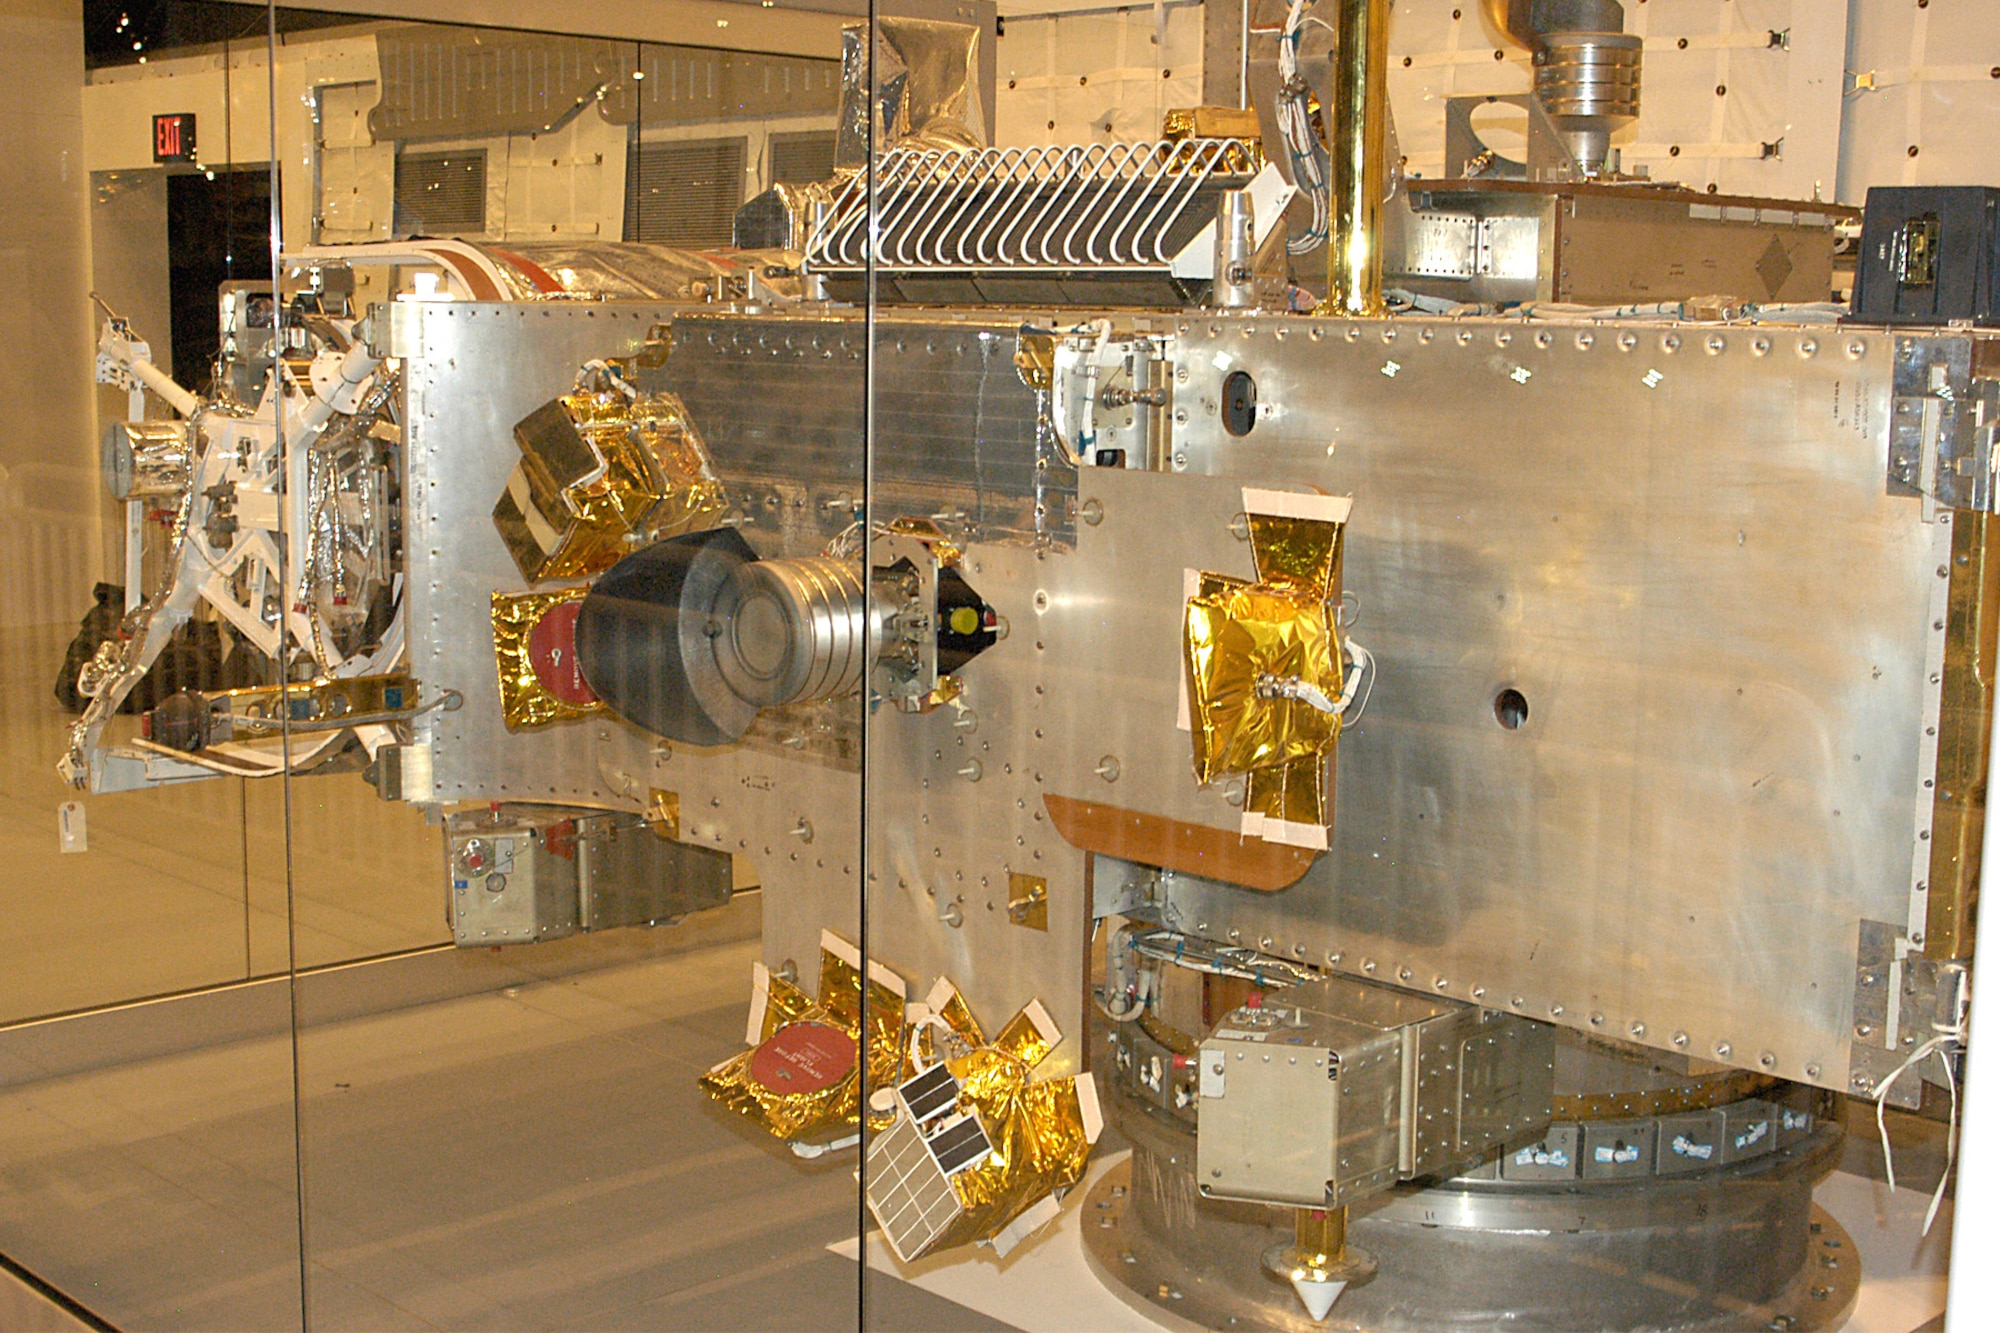 This experimental early-warning satellite was code named Teal Ruby. It was designed to test classified sensors to detect enemy aircraft crossing the polar region toward the USA during the Cold War. This would give U.S. forces early warning of nuclear attack. Teal Ruby was to be launched on a space shuttle in the 1980s, but the mission was cancelled. Instead, it became a test-bed for studying how space equipment ages in storage. (U.S. Air Force photo)